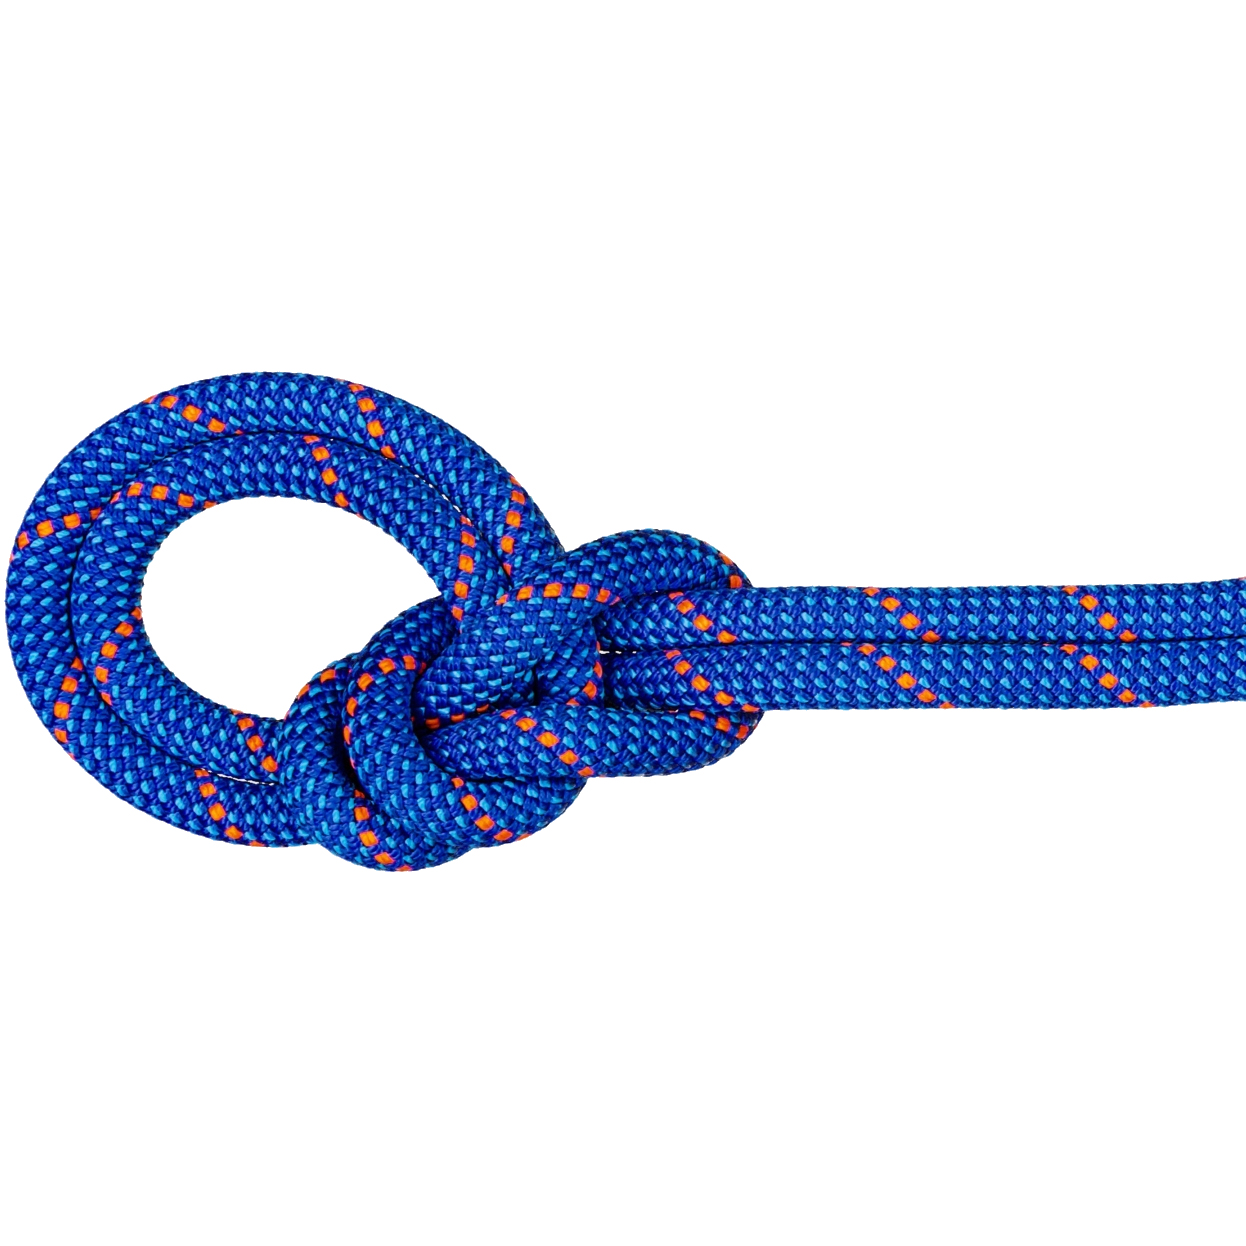 Picture of Mammut 9.5 Crag Dry Rope - 70m - blue-ocean